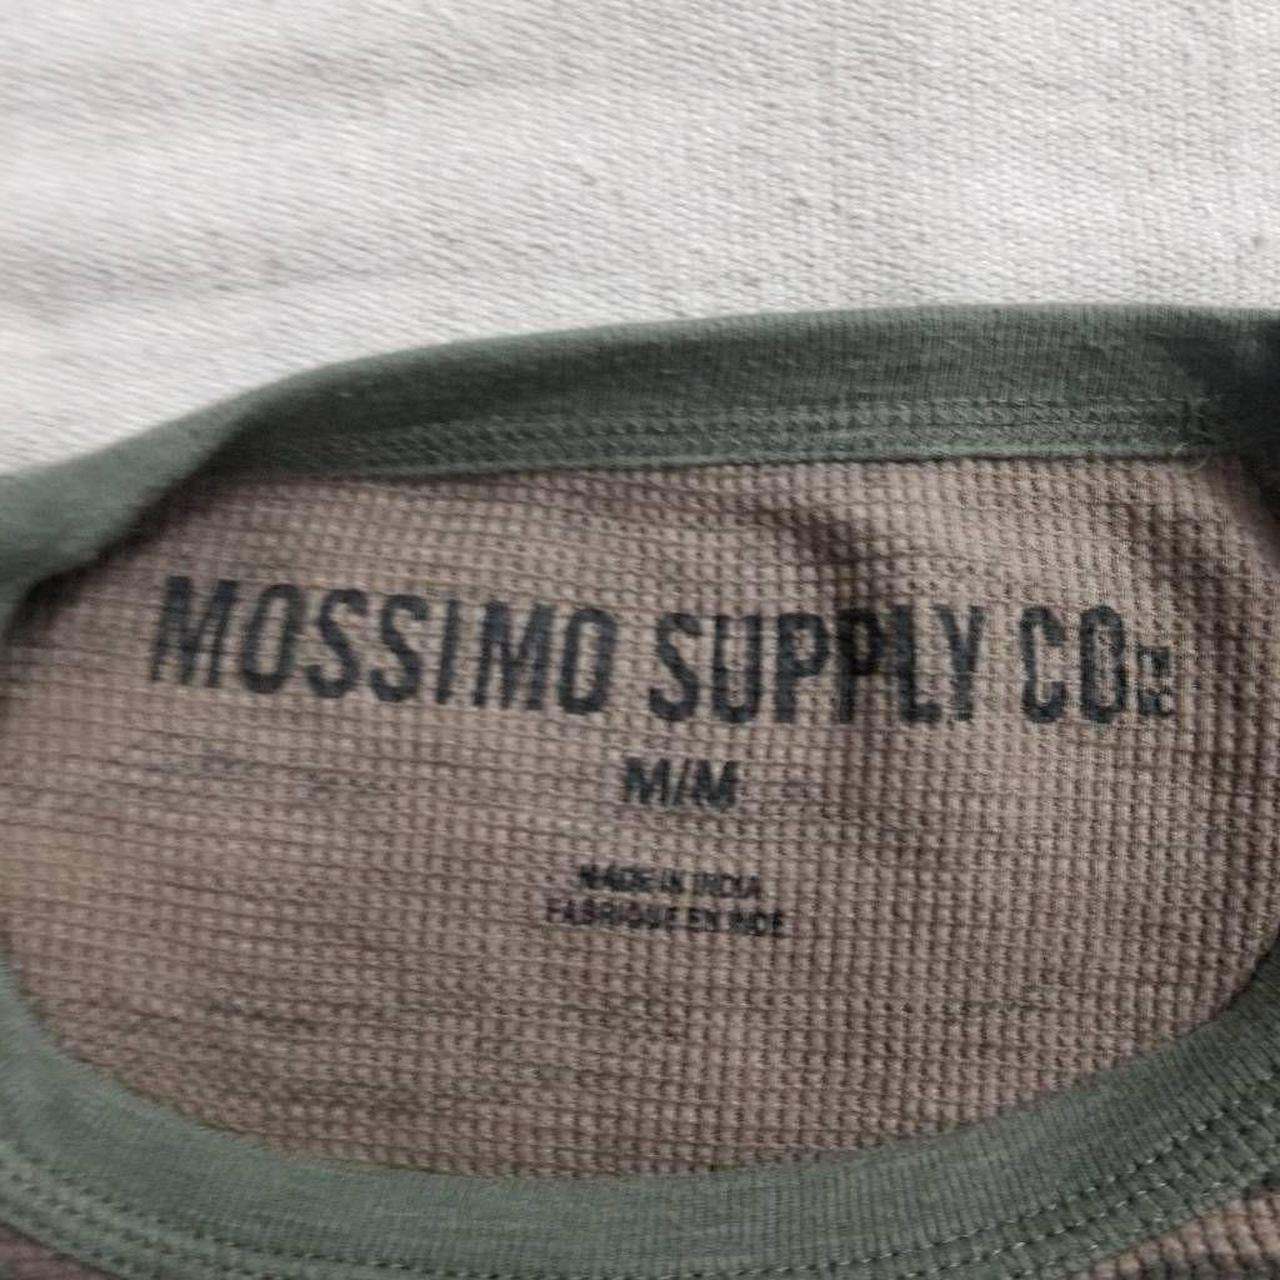 Brand: Mossimo Supply Co. Materials/Features: - Depop